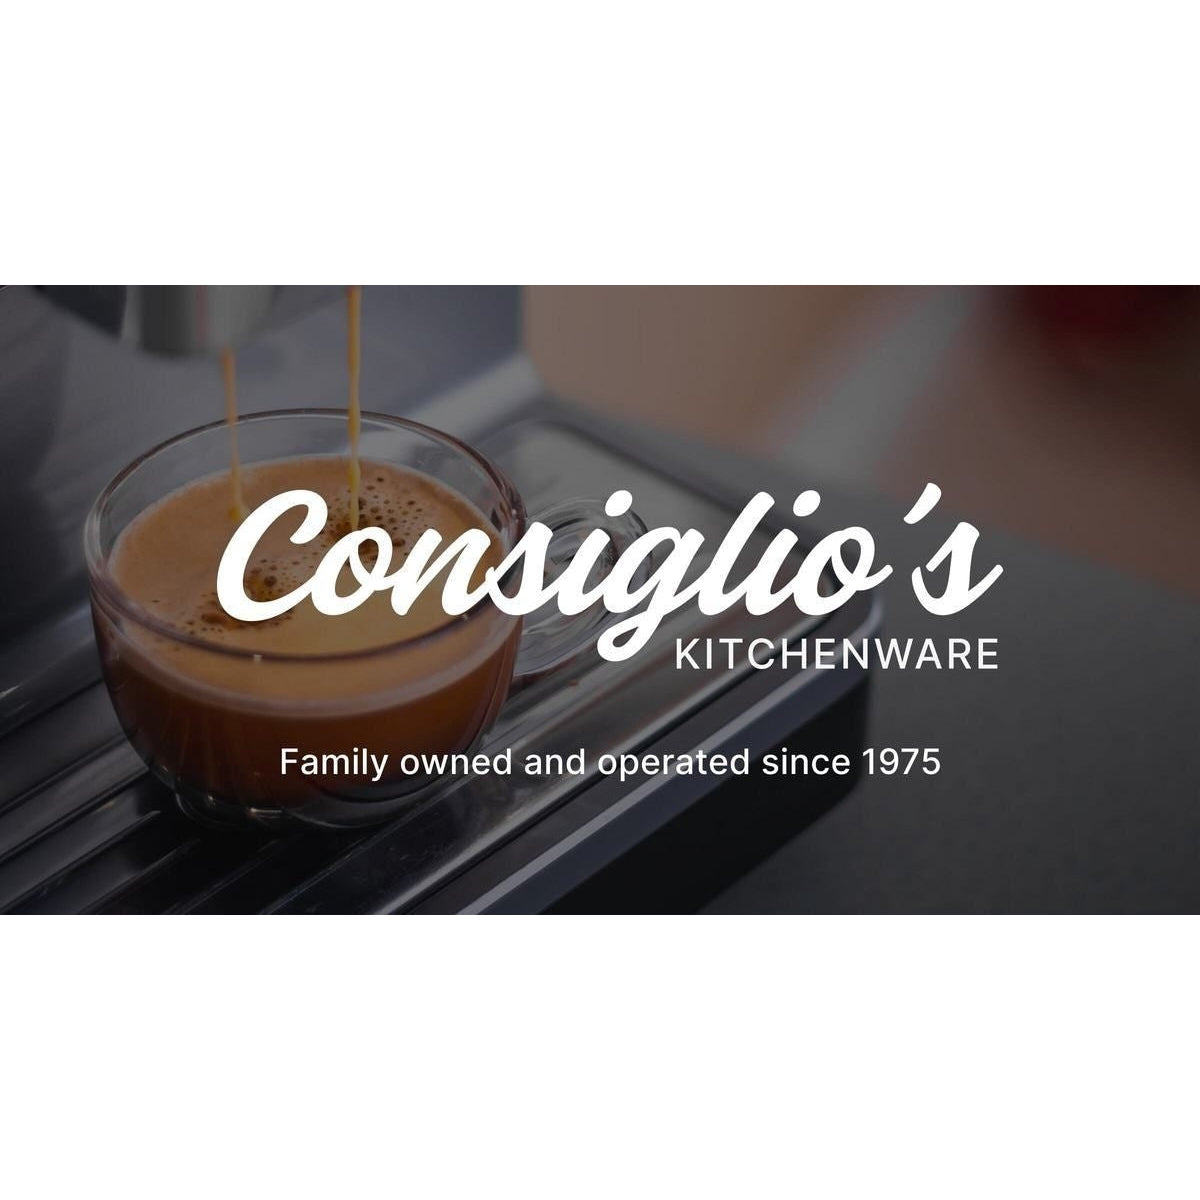 Consiglios's Kitchenware Family Ran Since 1975